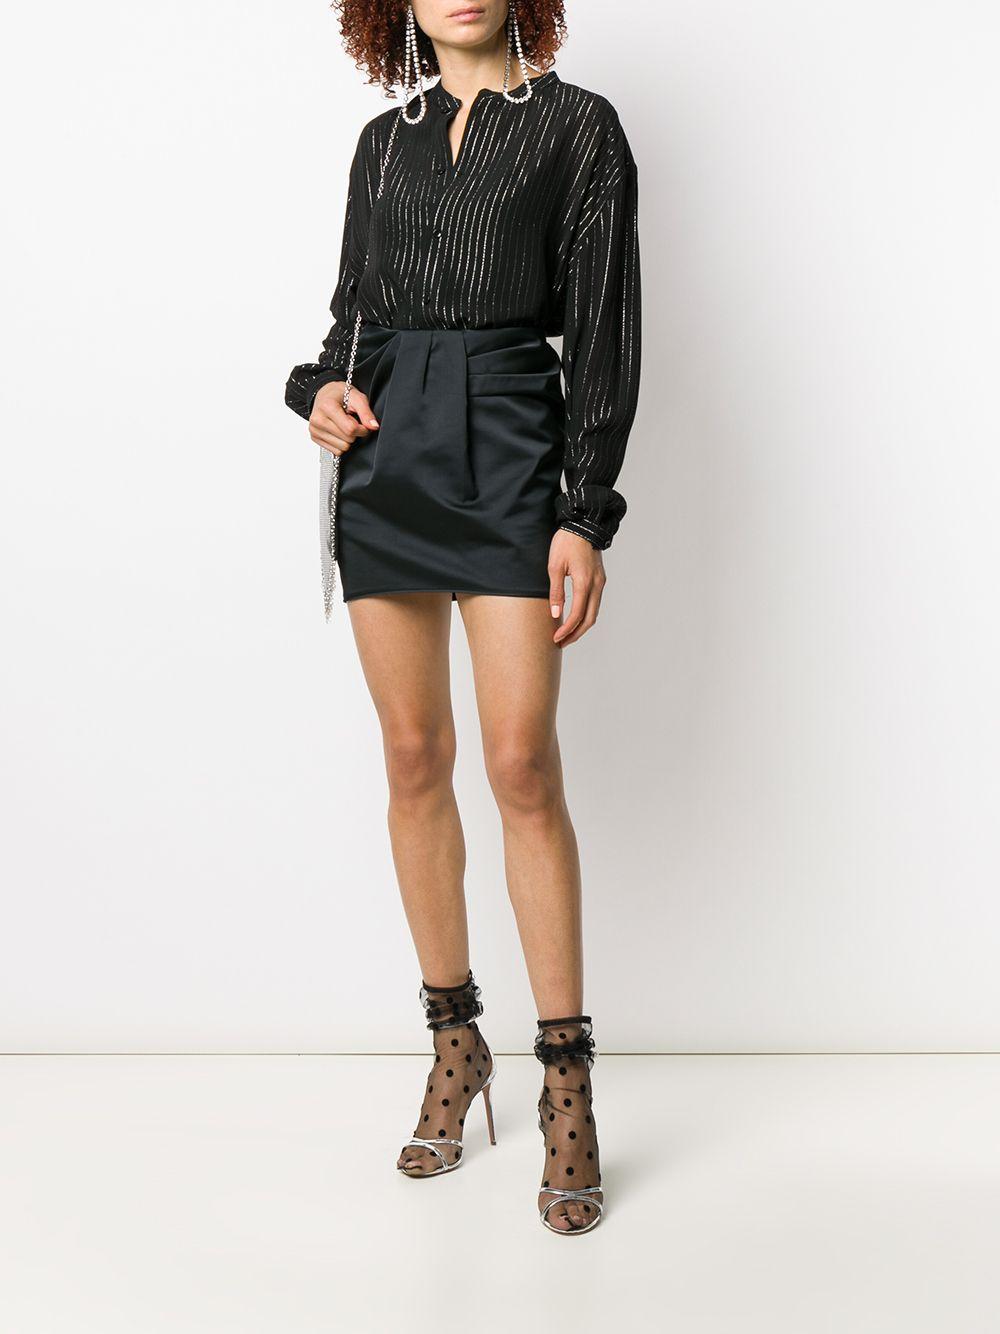 Saint Laurent Synthetic Striped Blouse in Black - Save 36% - Lyst